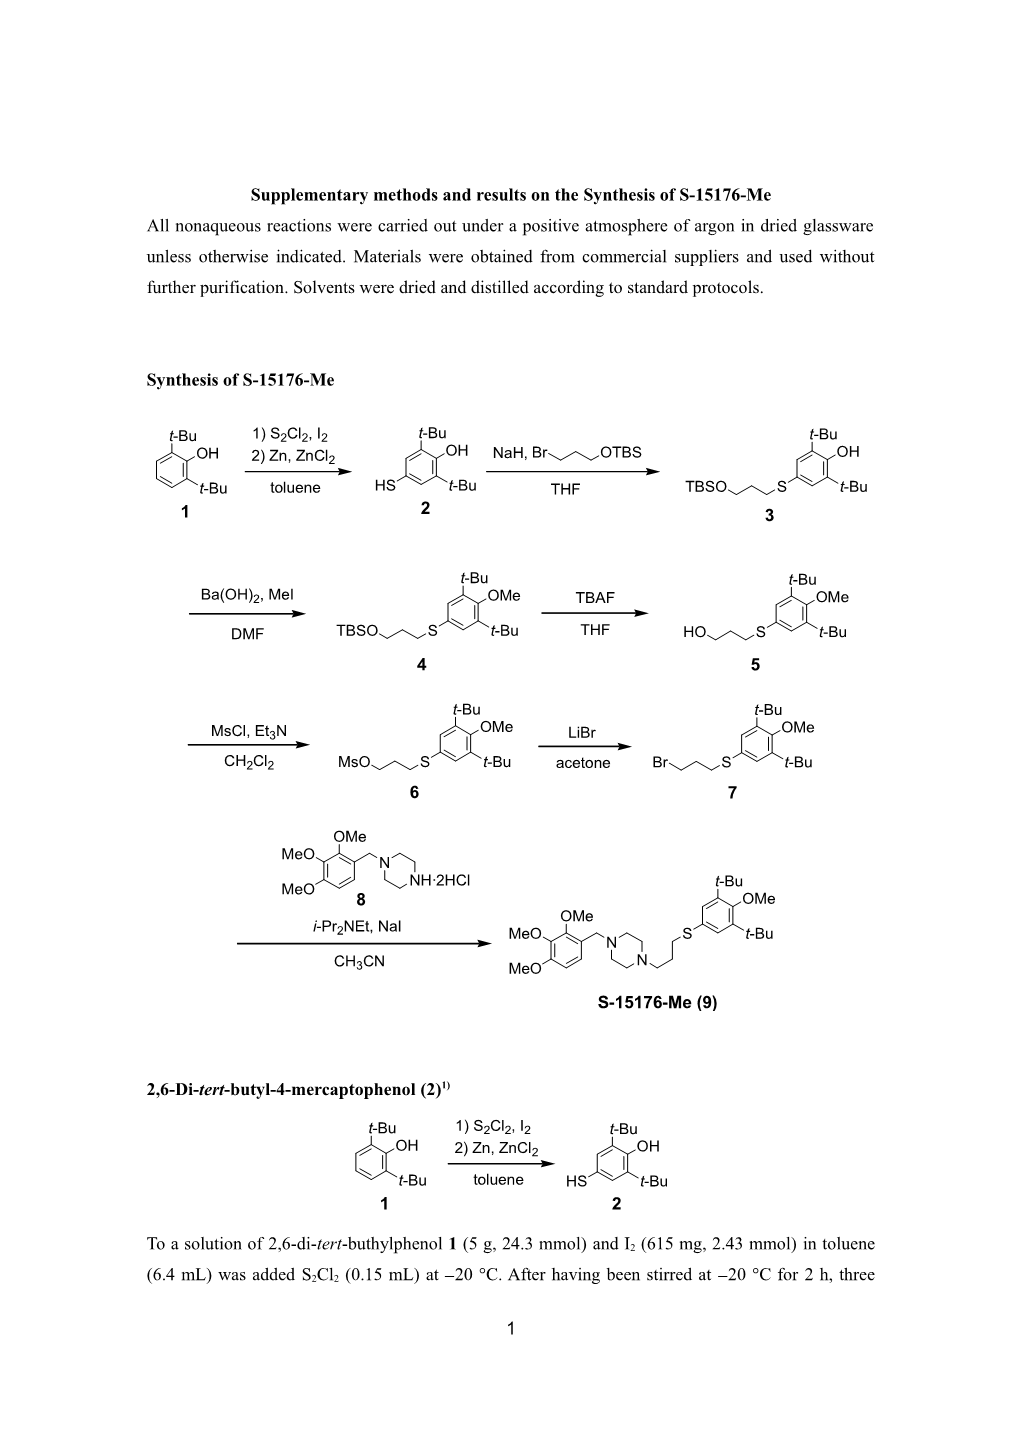 Supplementary Methods and Results on the Synthesis of S-15176-Me